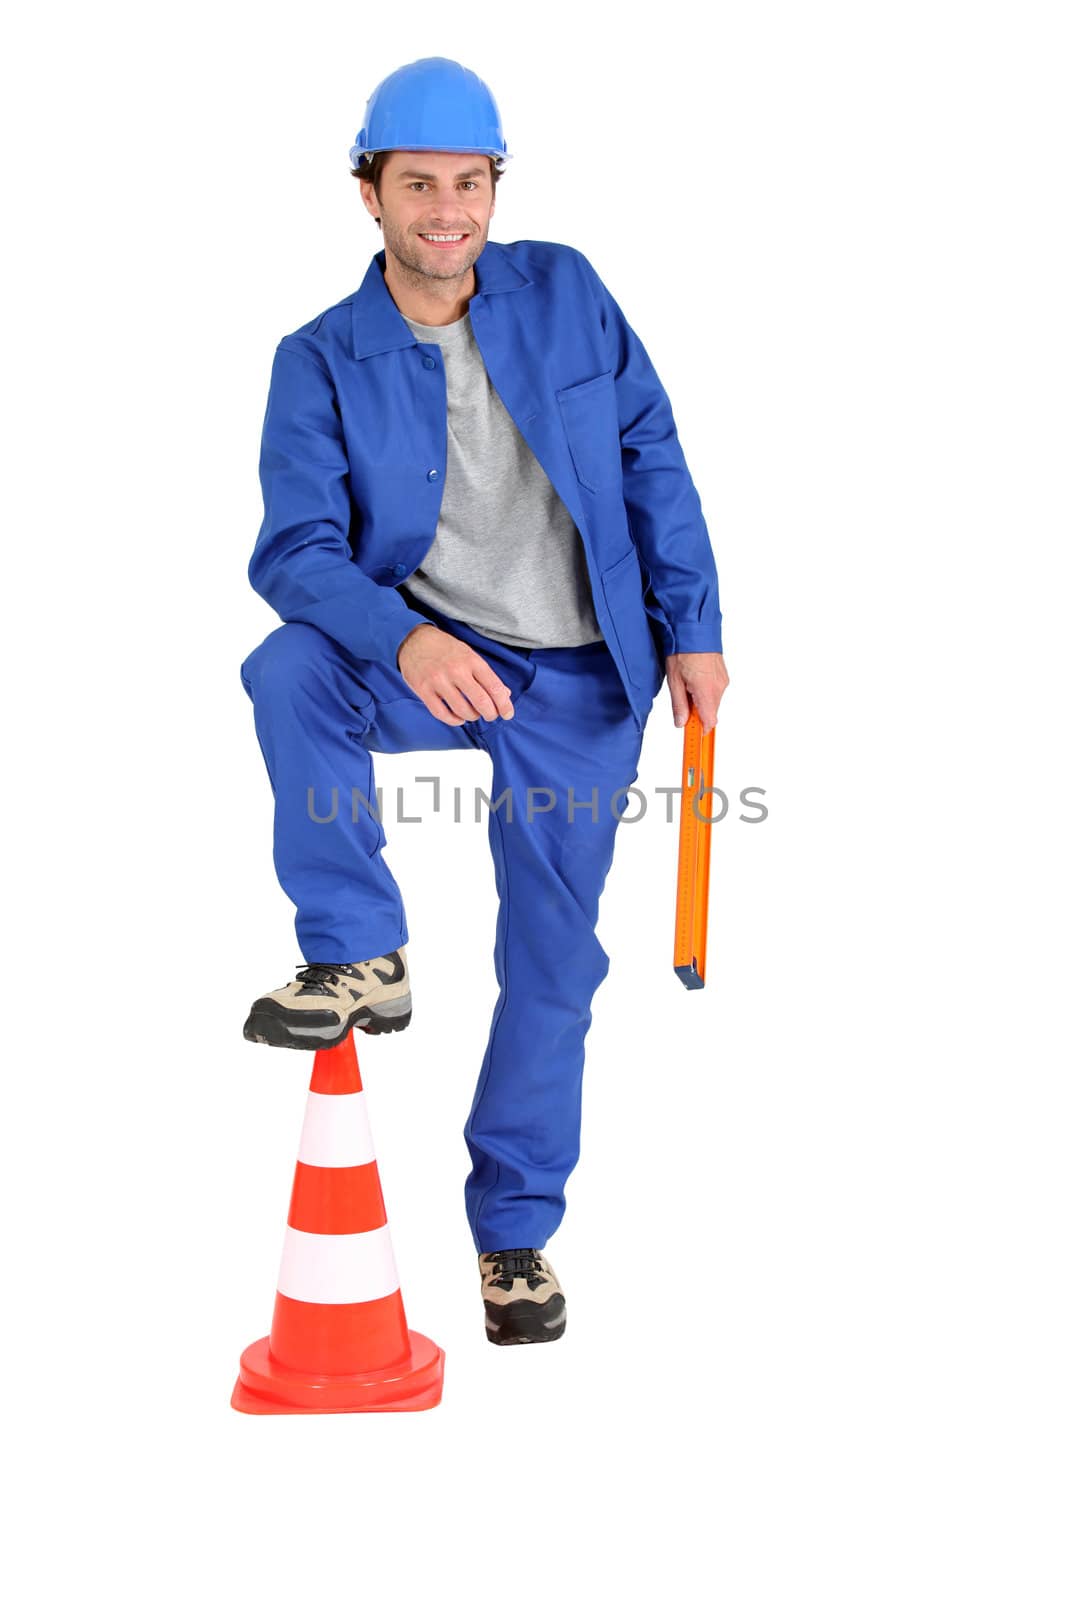 Builder with foot on cone.